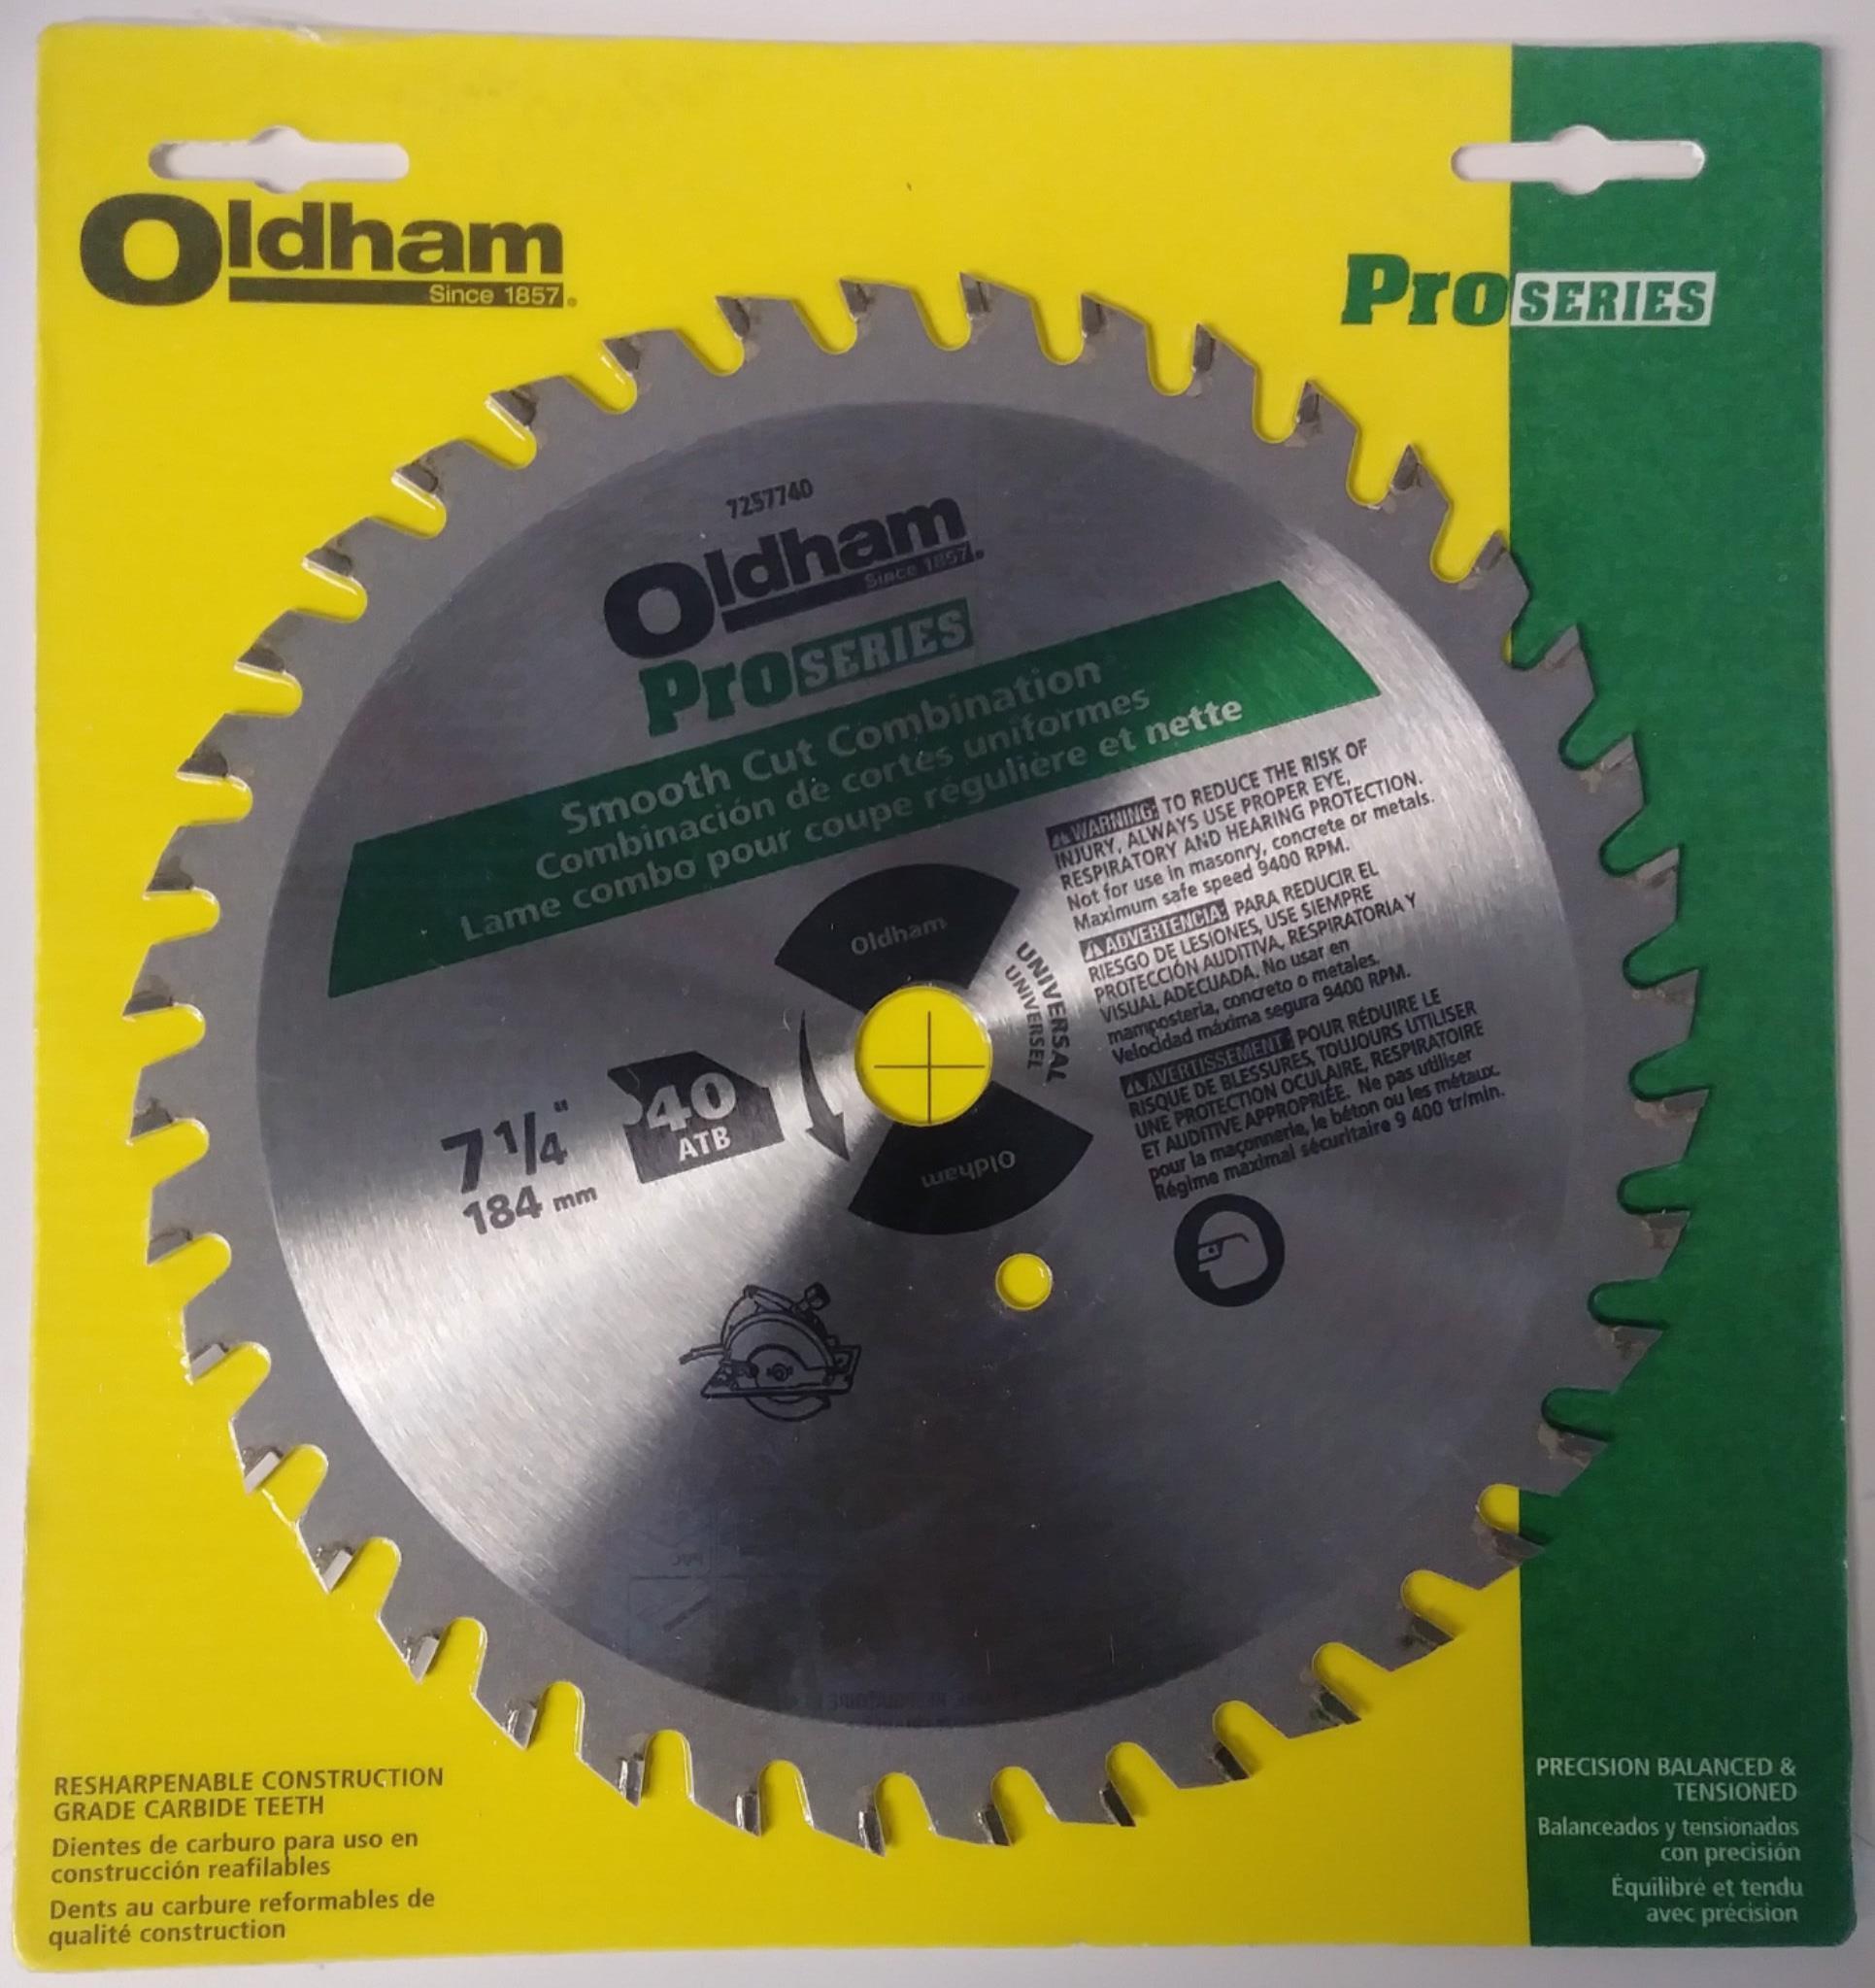 Oldham Pro Series 7257740 7-1/4" x 40 ATB Smooth Cut Combination Saw Blade USA